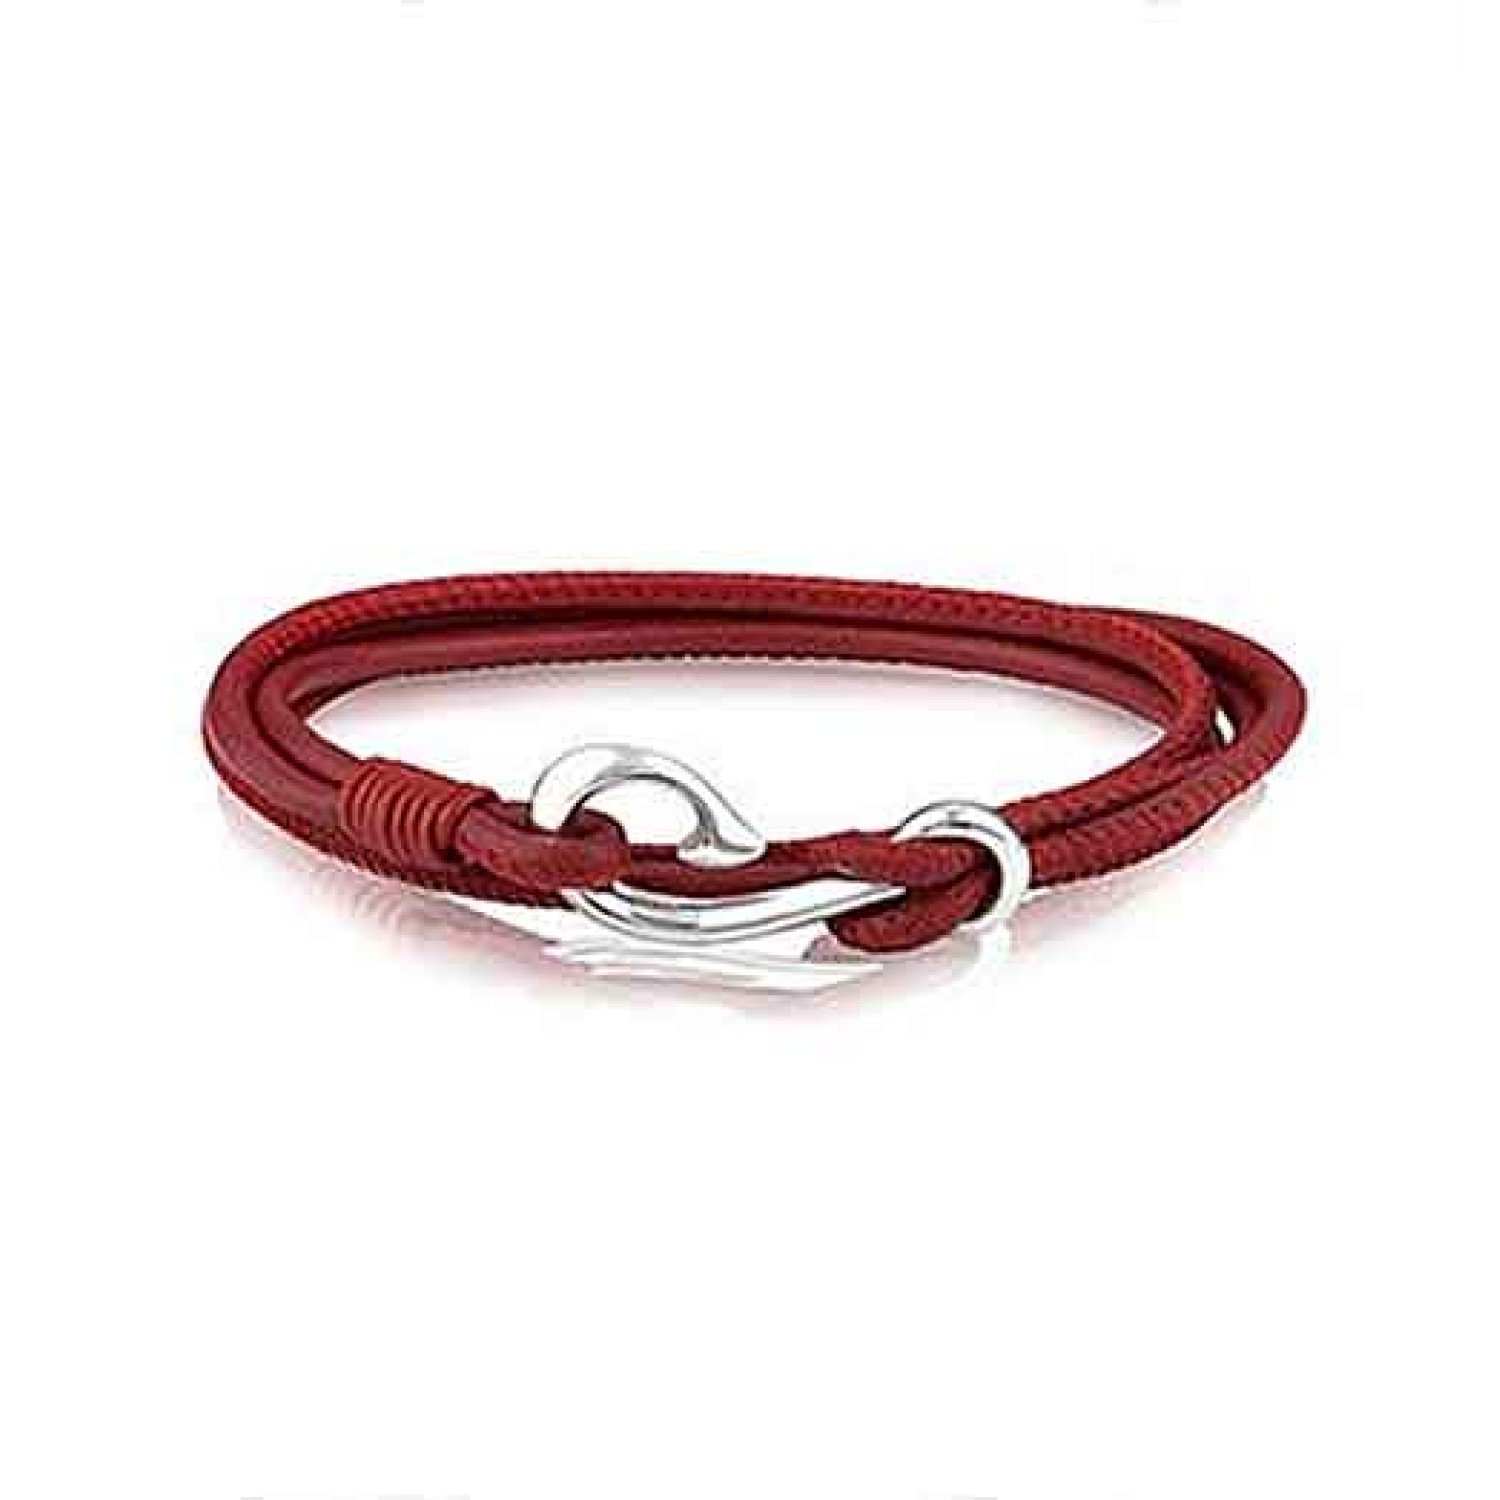 Evolve Pohutukawa Safe Travel Wrap LKBWRS19. The Safe Travel Wrap Bracelet features a sterling silver safe travel hook on soft leather, promising protection and safety as you explore the world. This bracelet wraps around your wrist twice and loops onto th